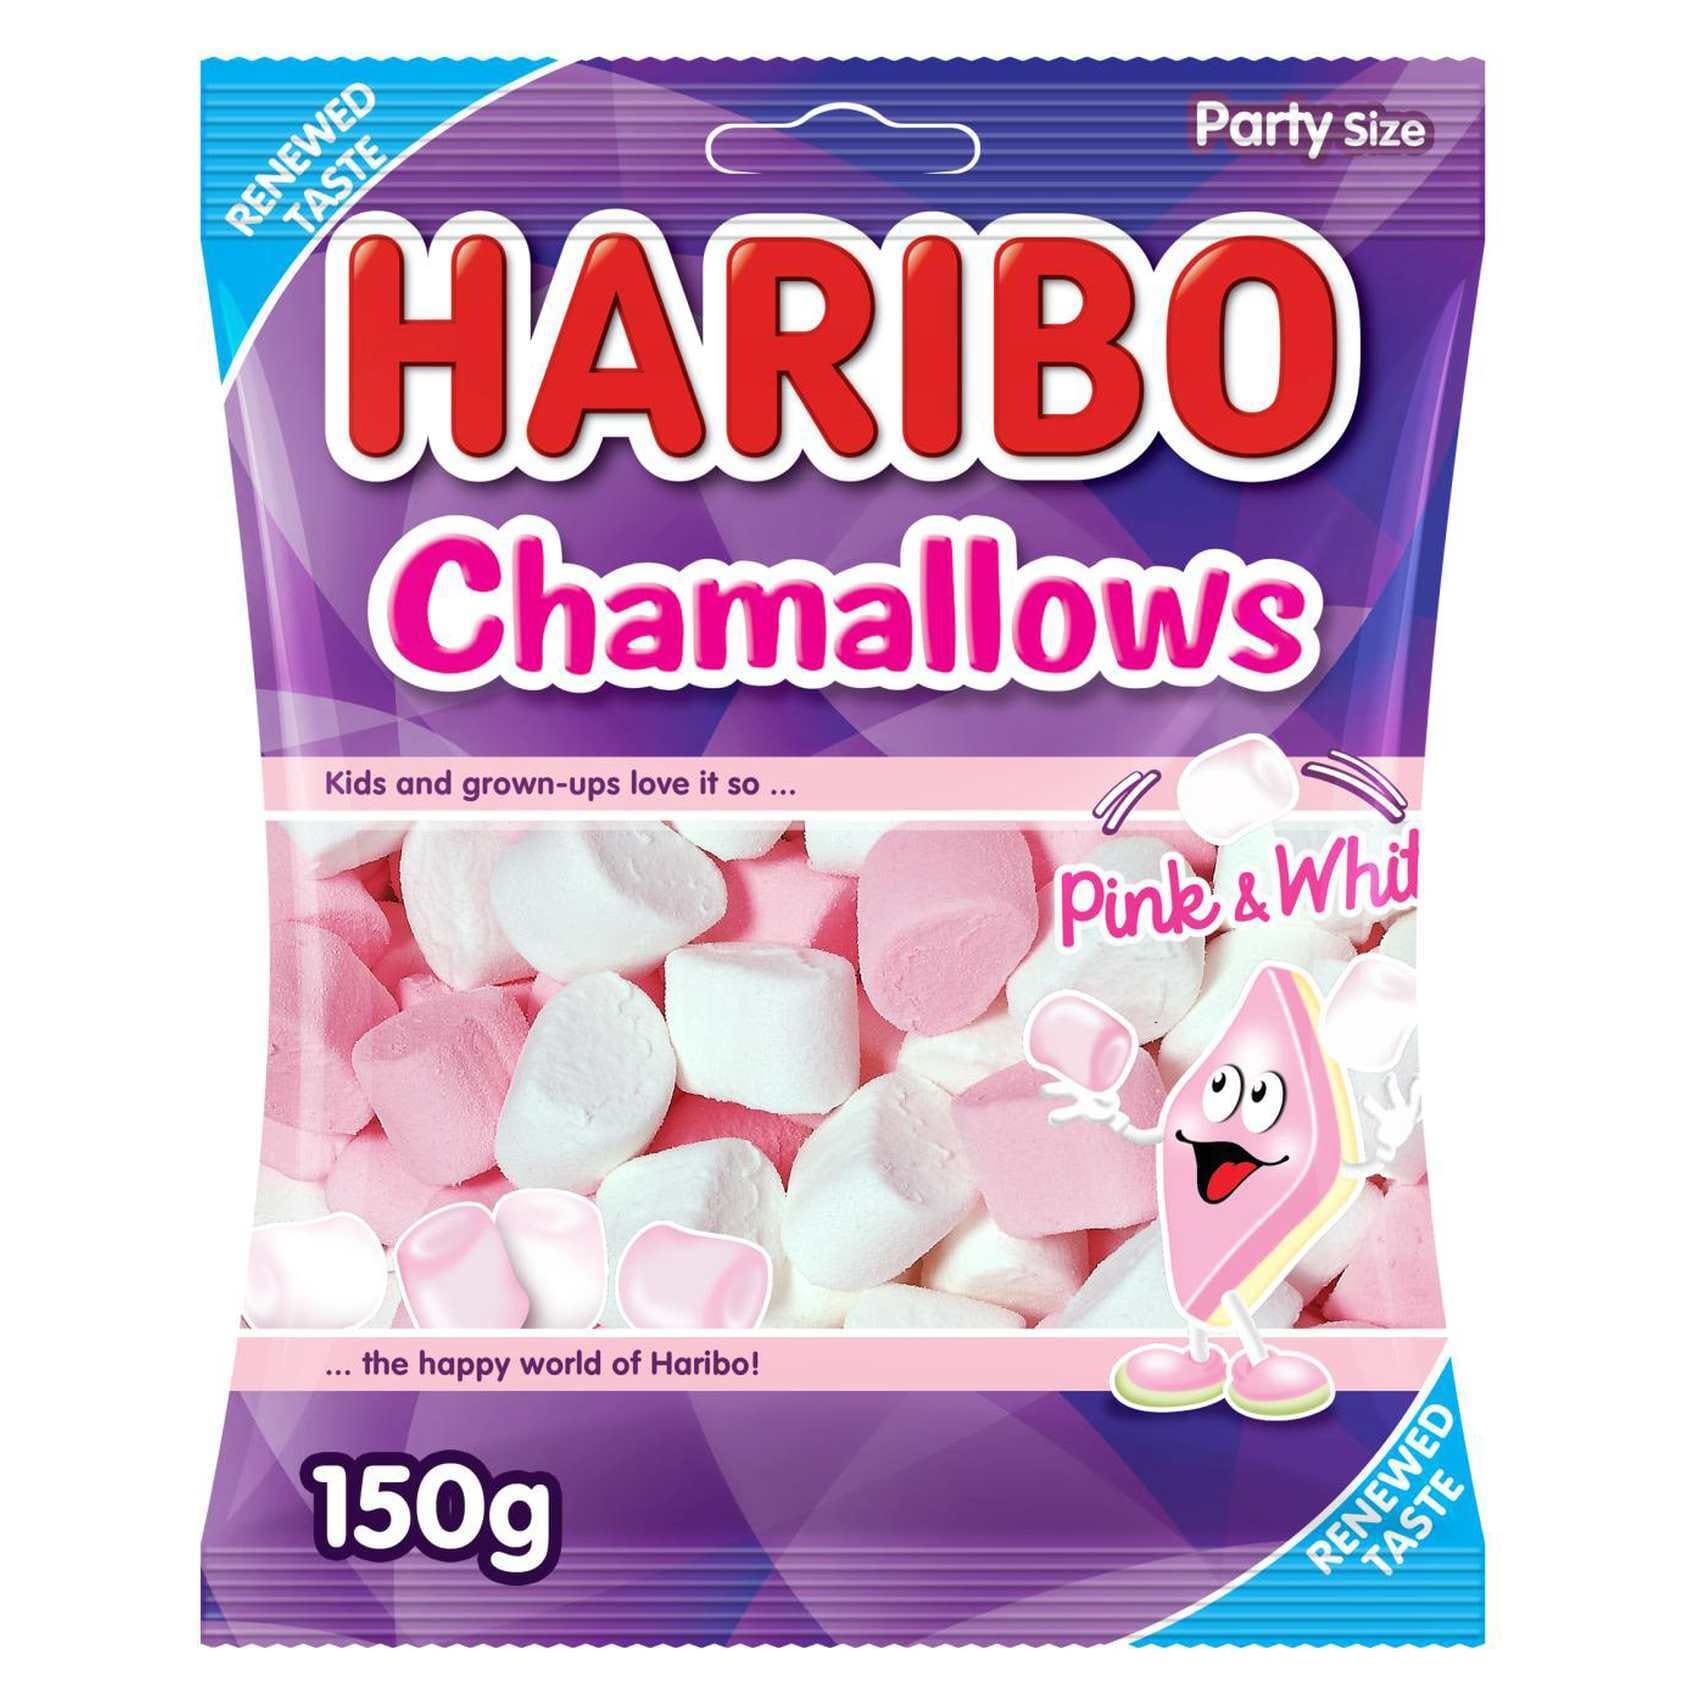 Buy Candy Online - Shop on Carrefour UAE